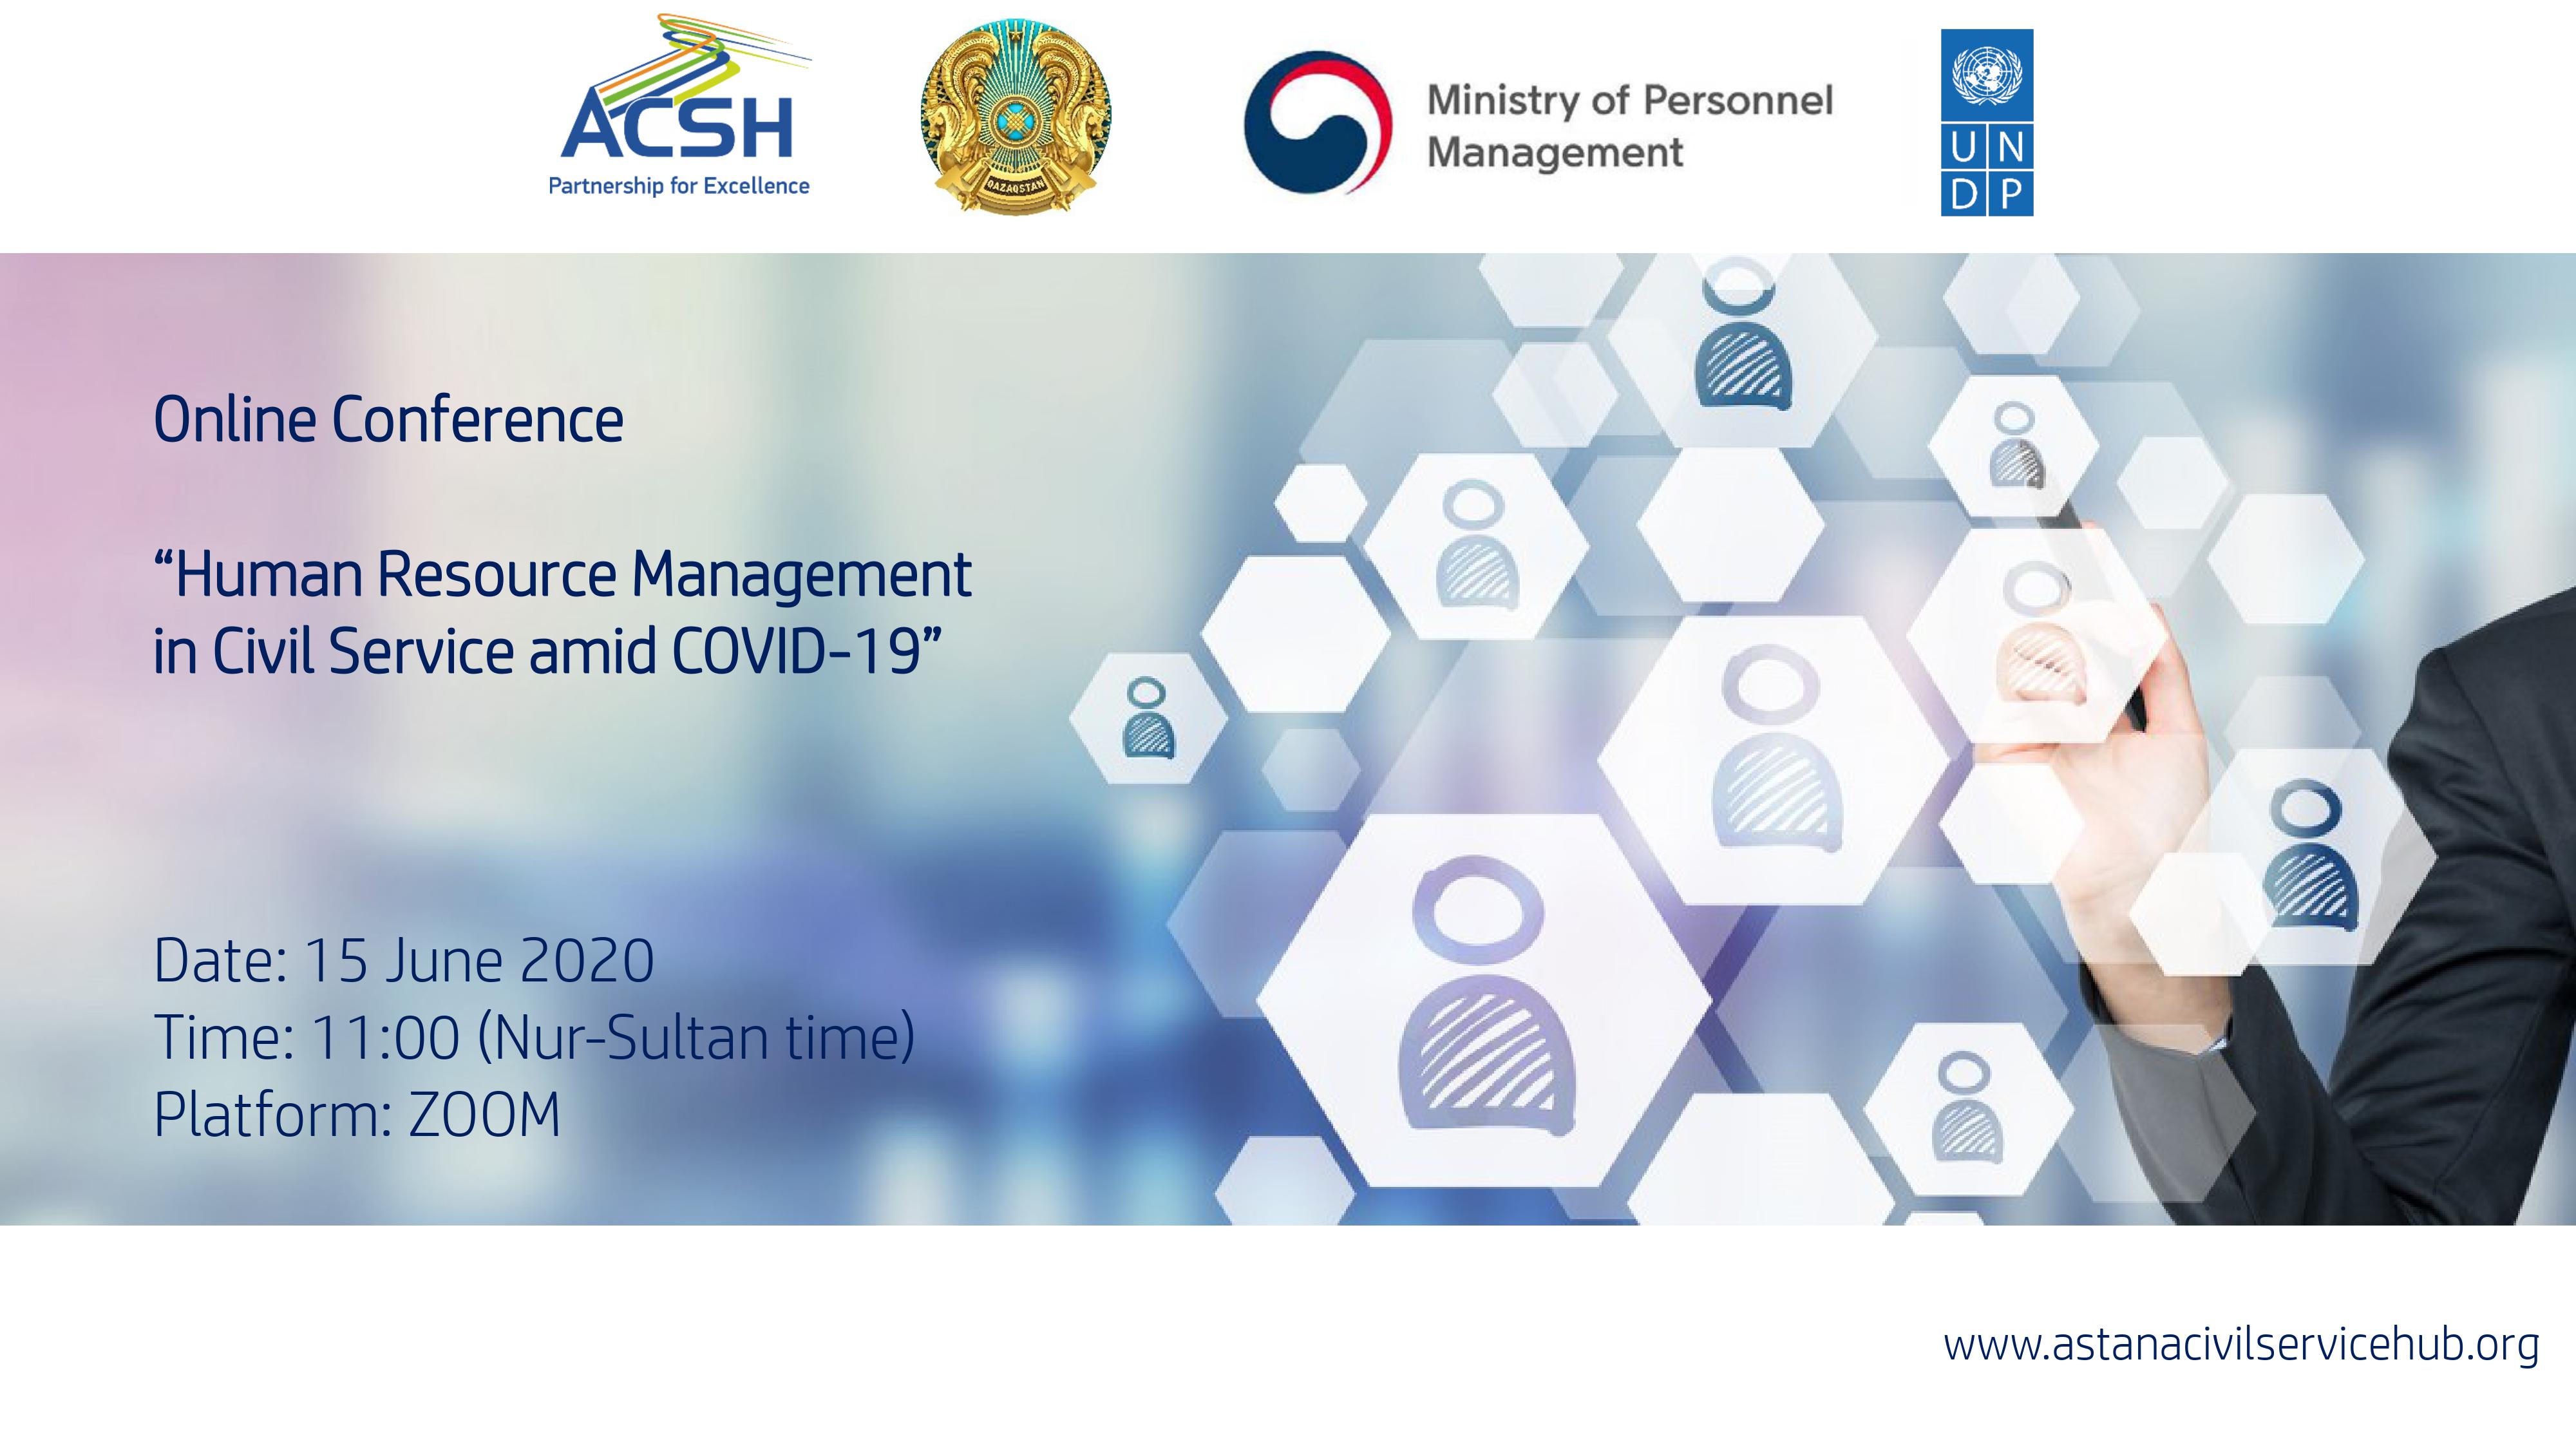 Online Conference  “Human Resource Management in Civil Service amid COVID-19: Best Practices and Solutions”